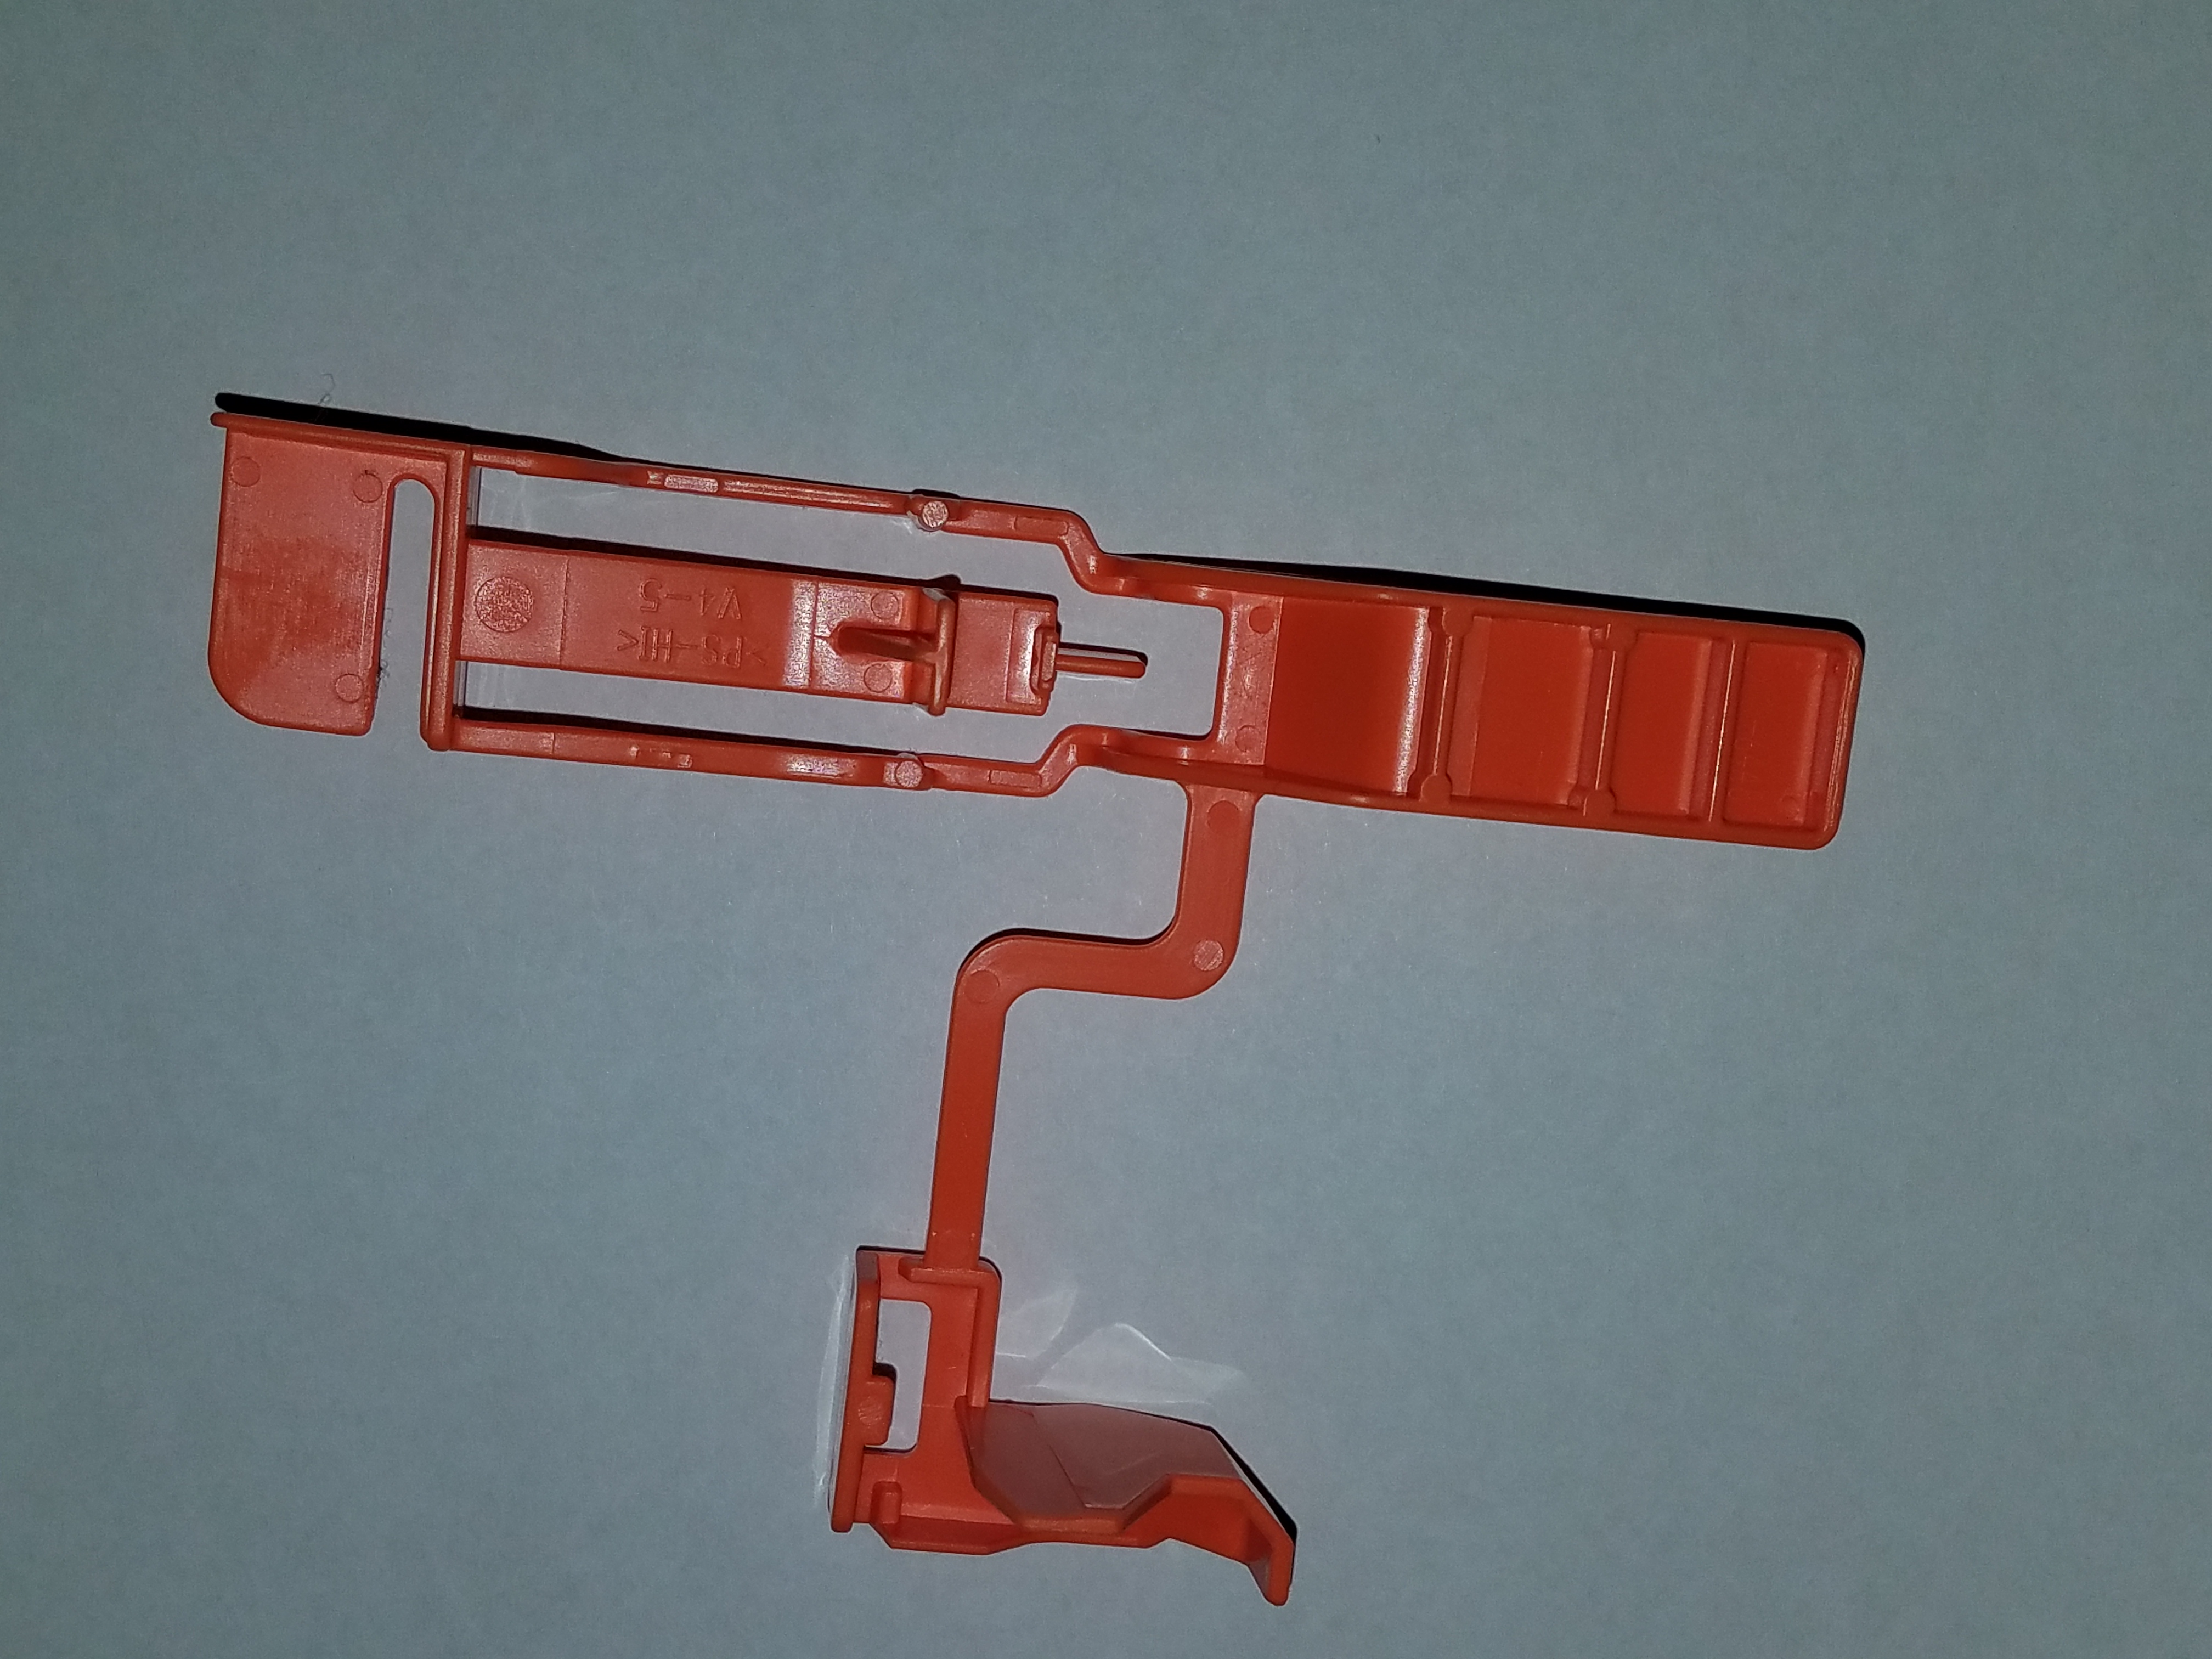 20190113_red plastic guide overall 3x4 inch.jpg